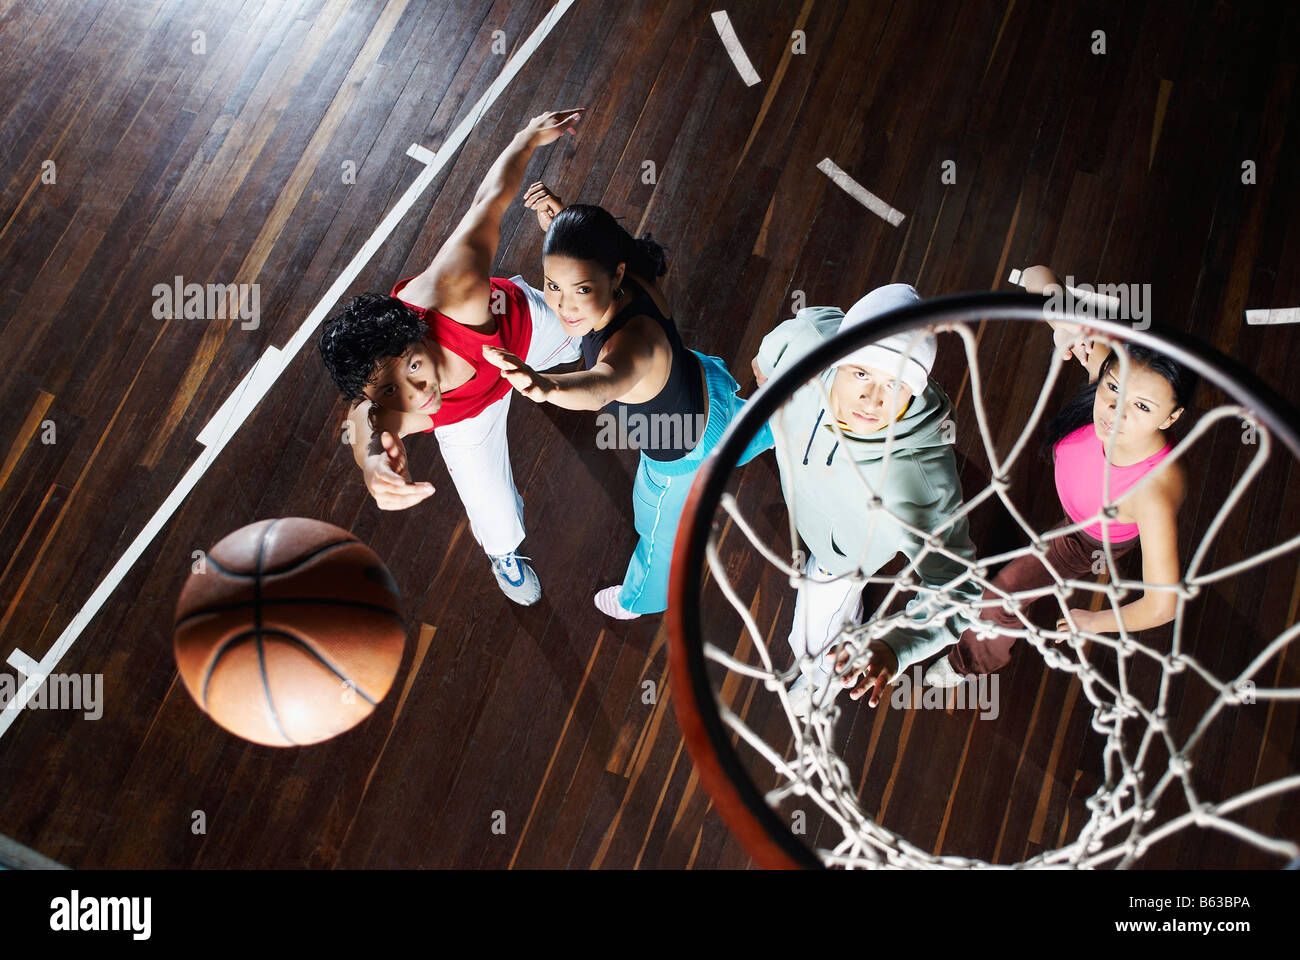 High angle view of two young men with two young women playing basketball Stock Photo